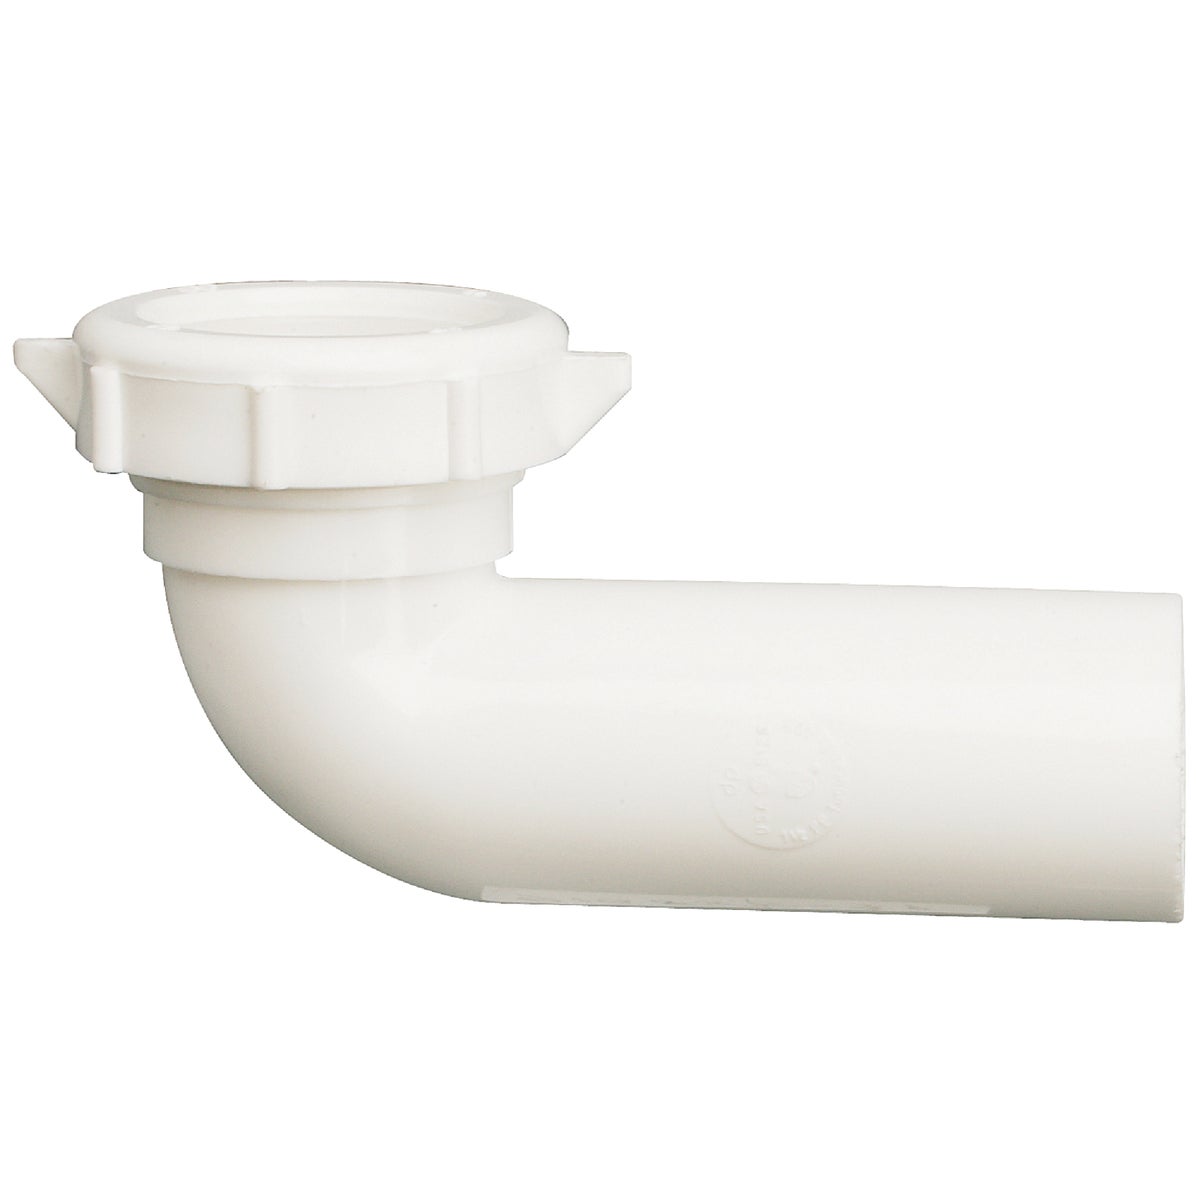 WST KING DISPOSER ELBOW